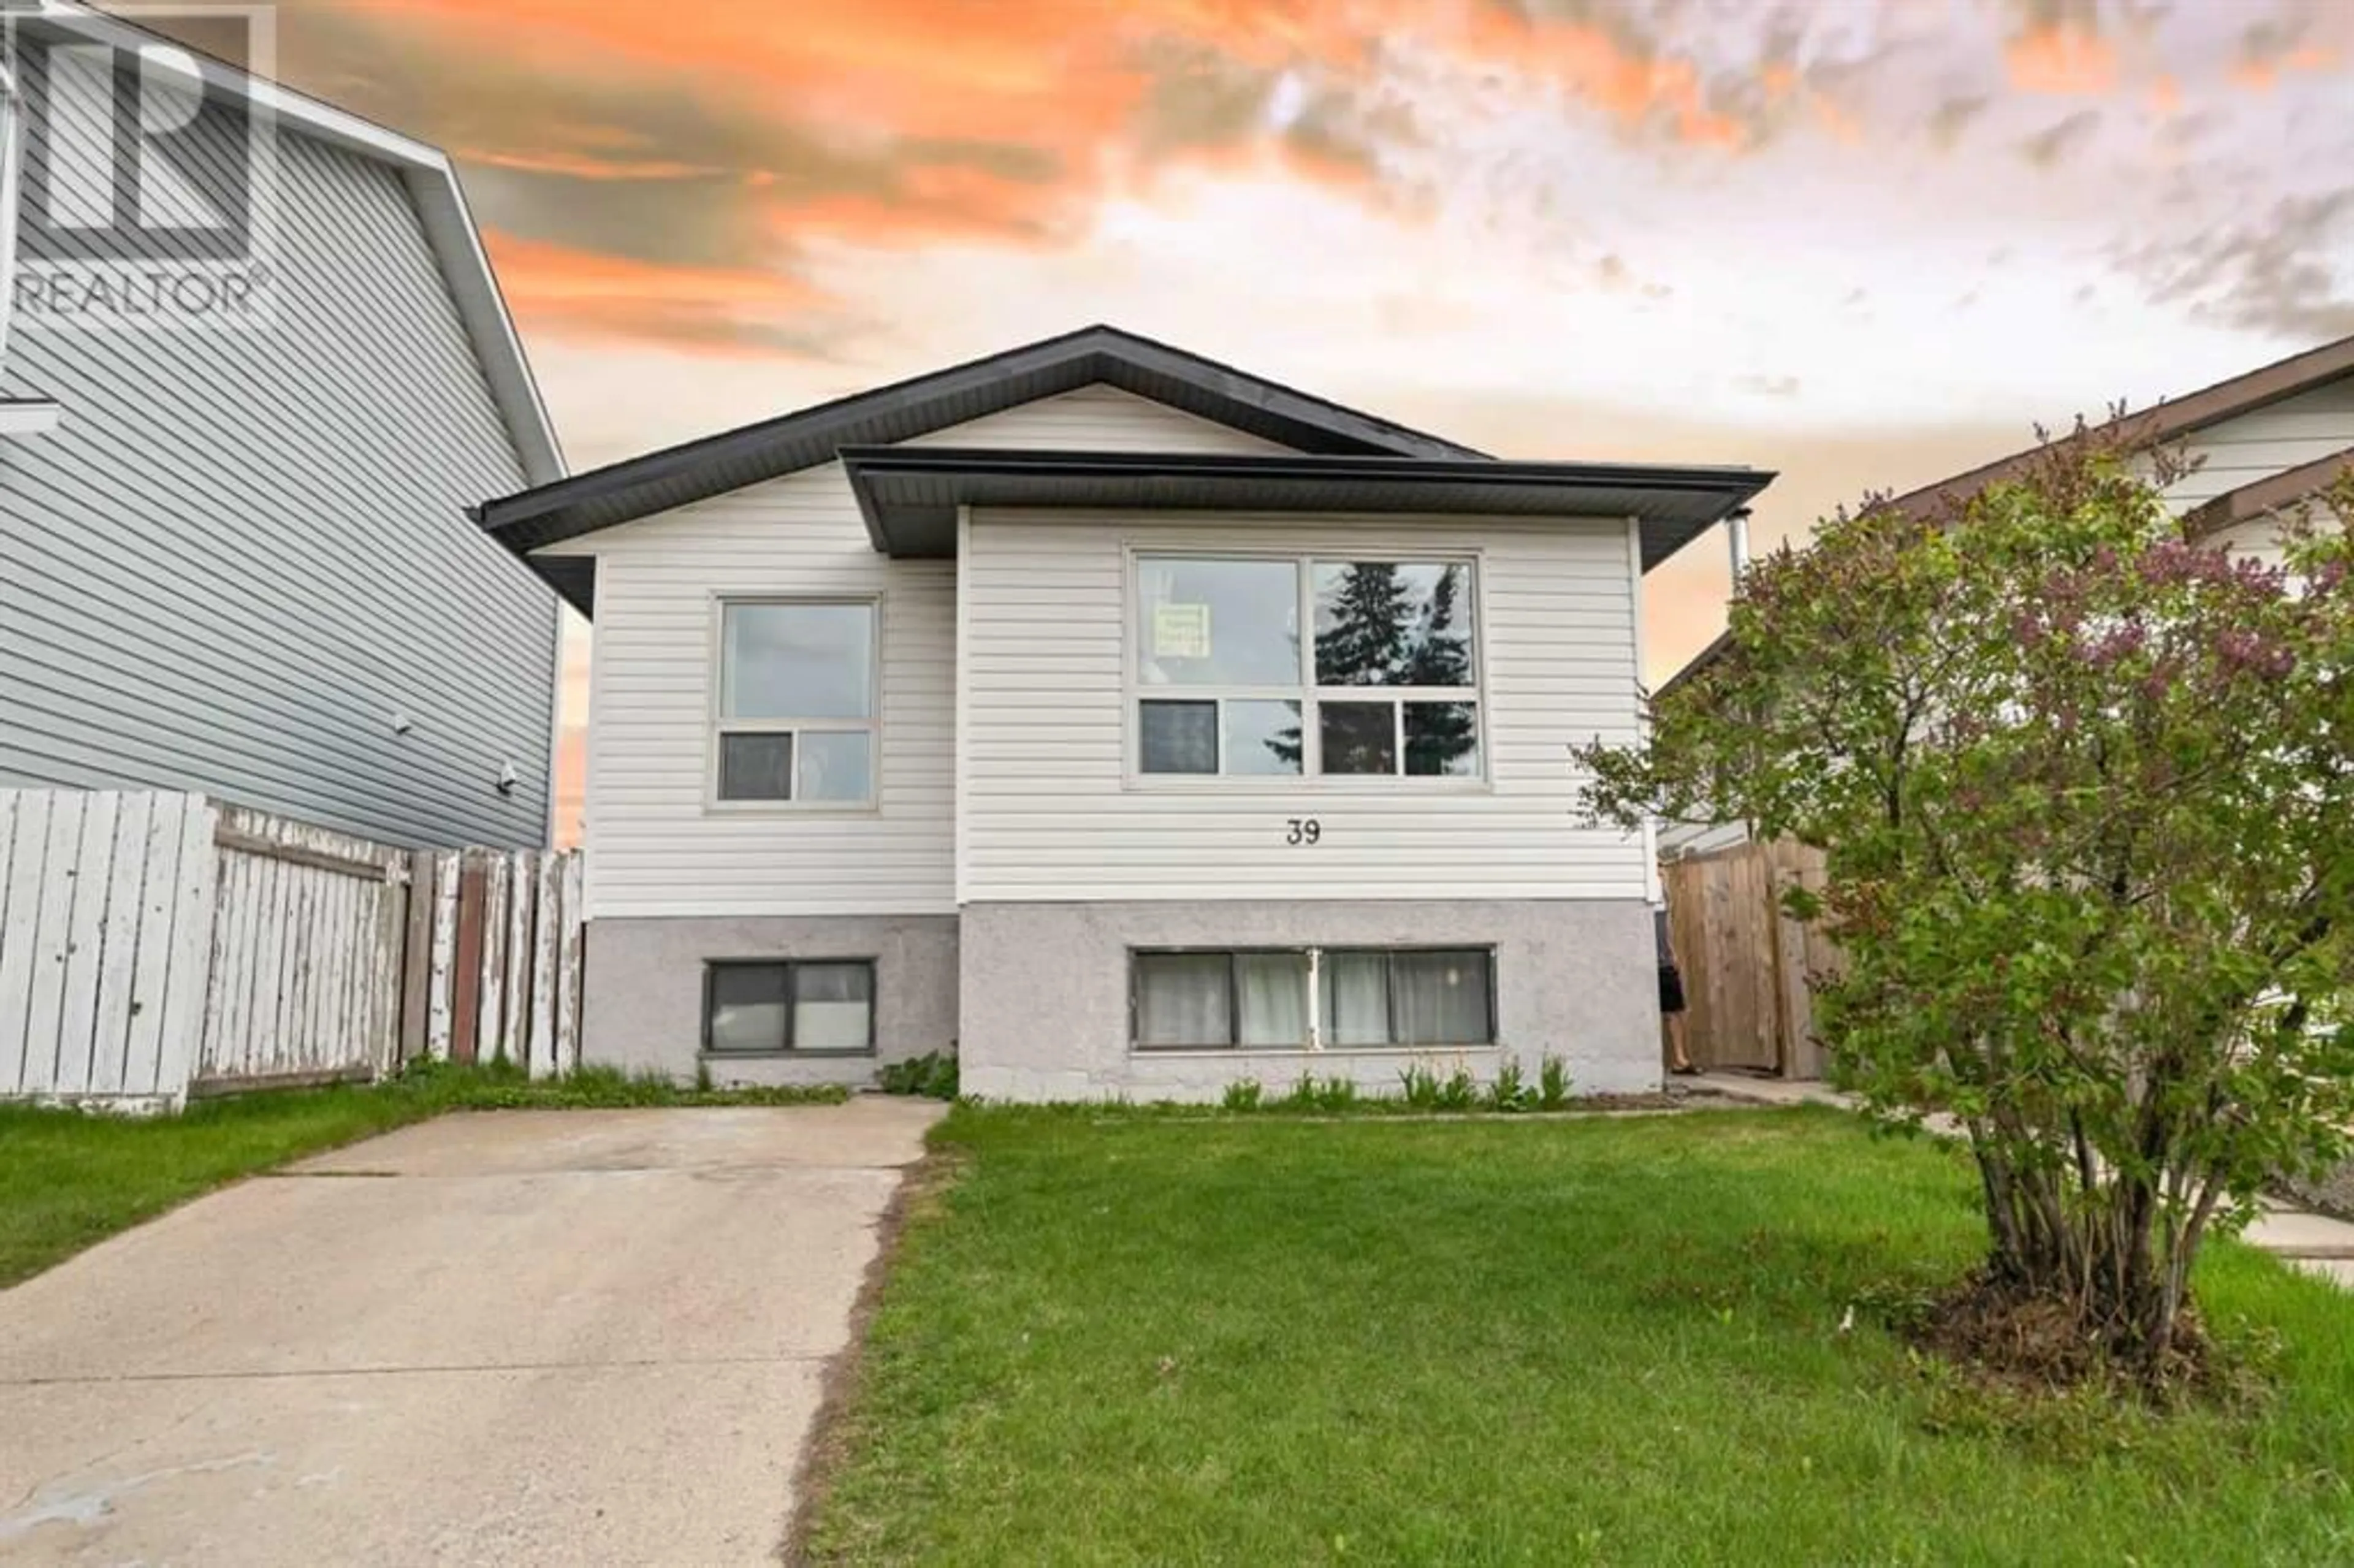 Frontside or backside of a home for 39 Whitworth Way NE, Calgary Alberta T1Y6B1